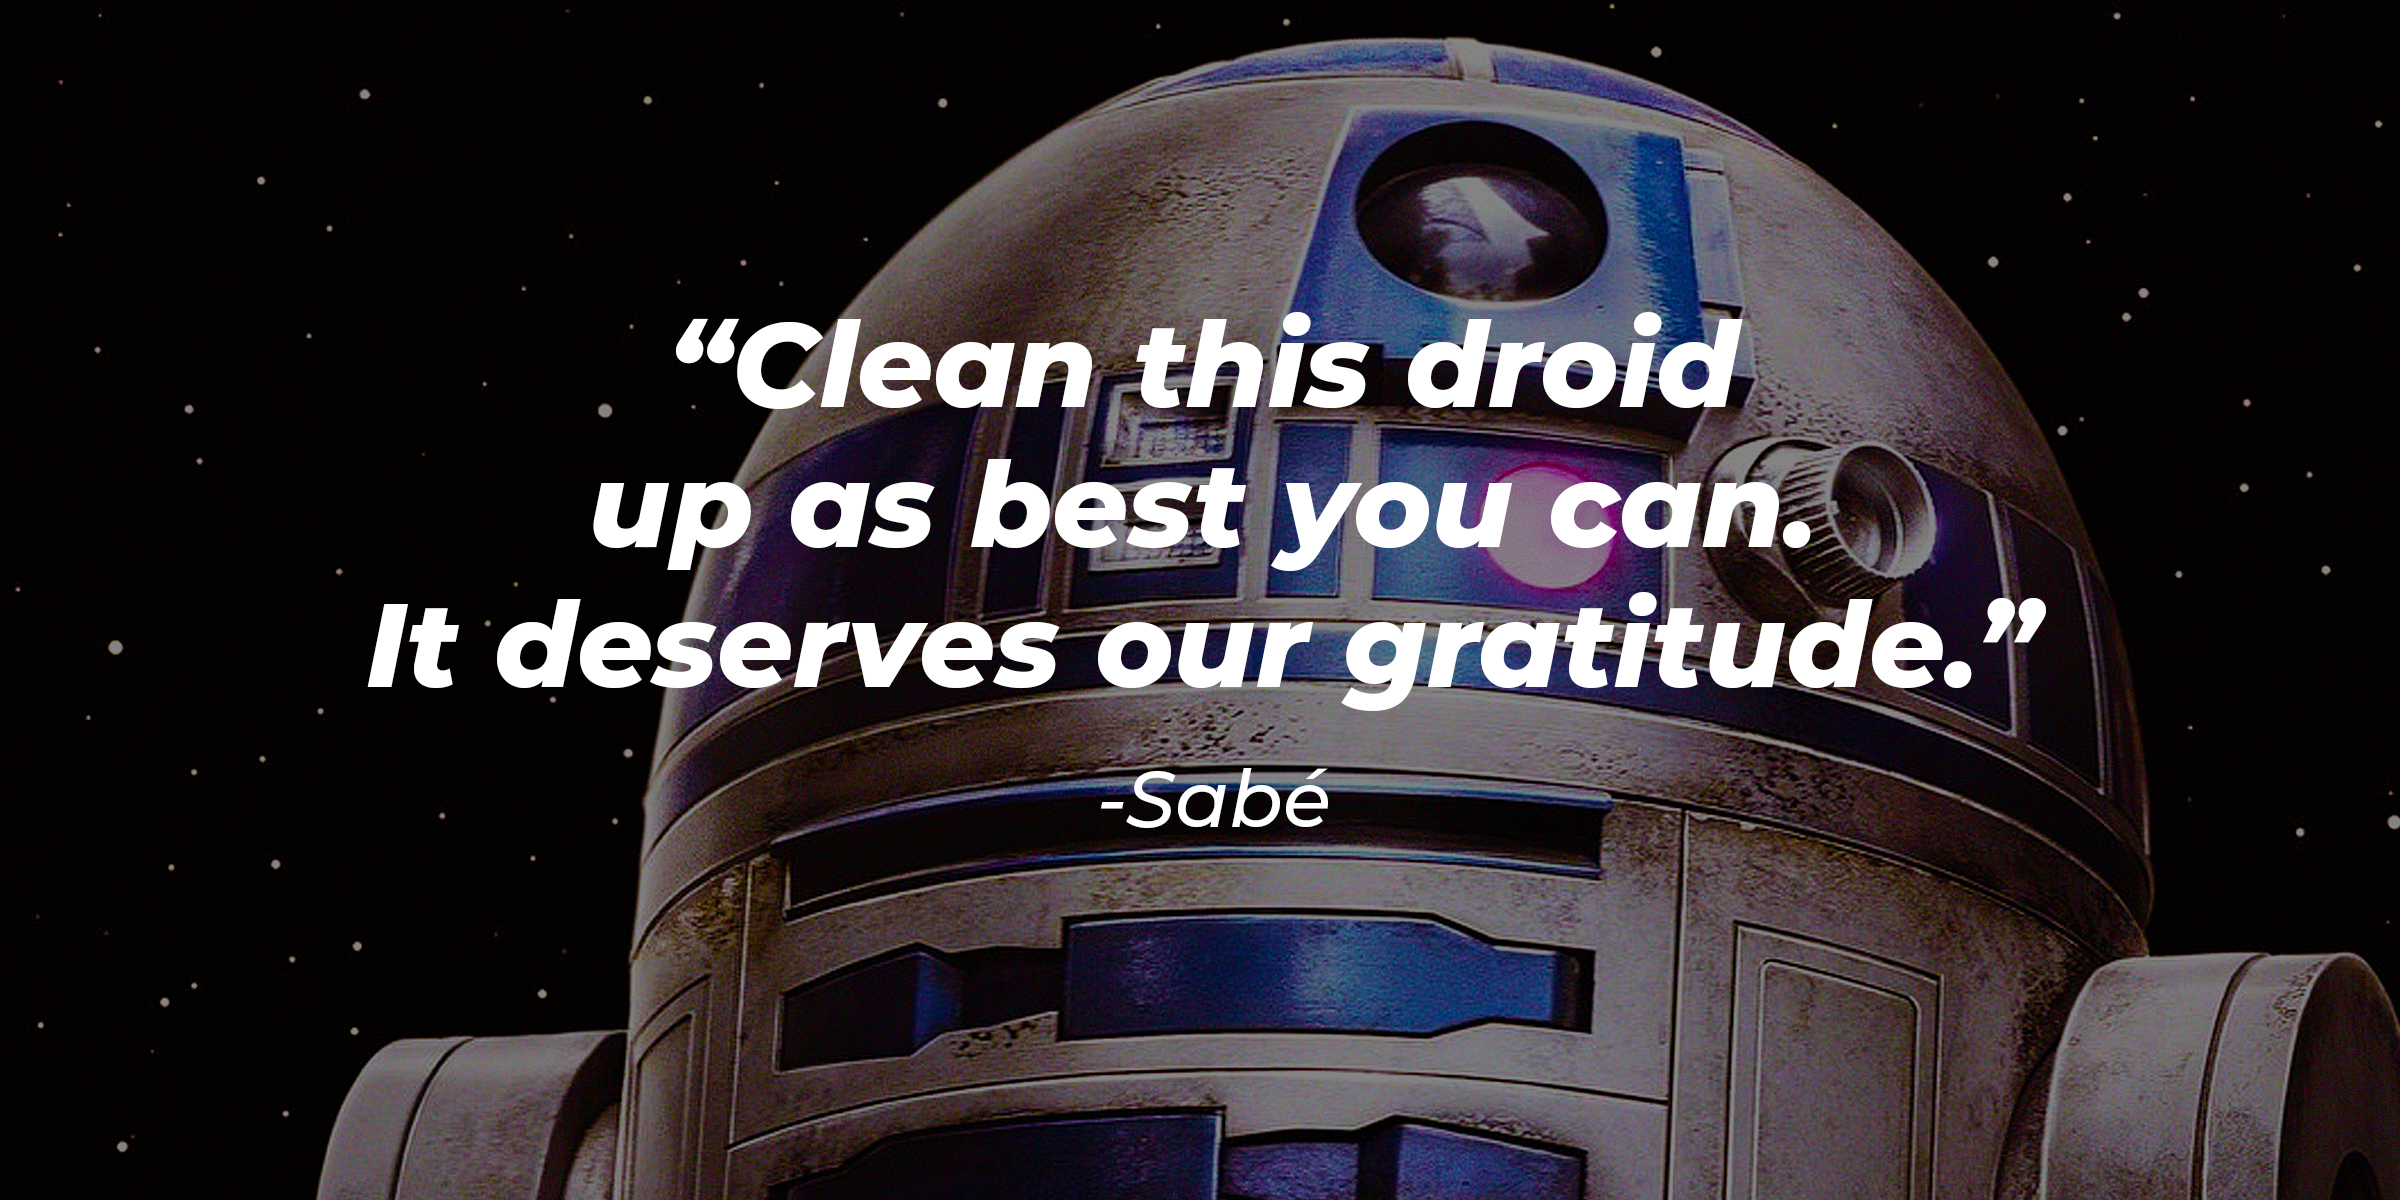 A photo of R2-D2 with Sabé's quote: "Clean this droid up as best you can. It deserves our gratitude." | Source: facebook.com/StarWars